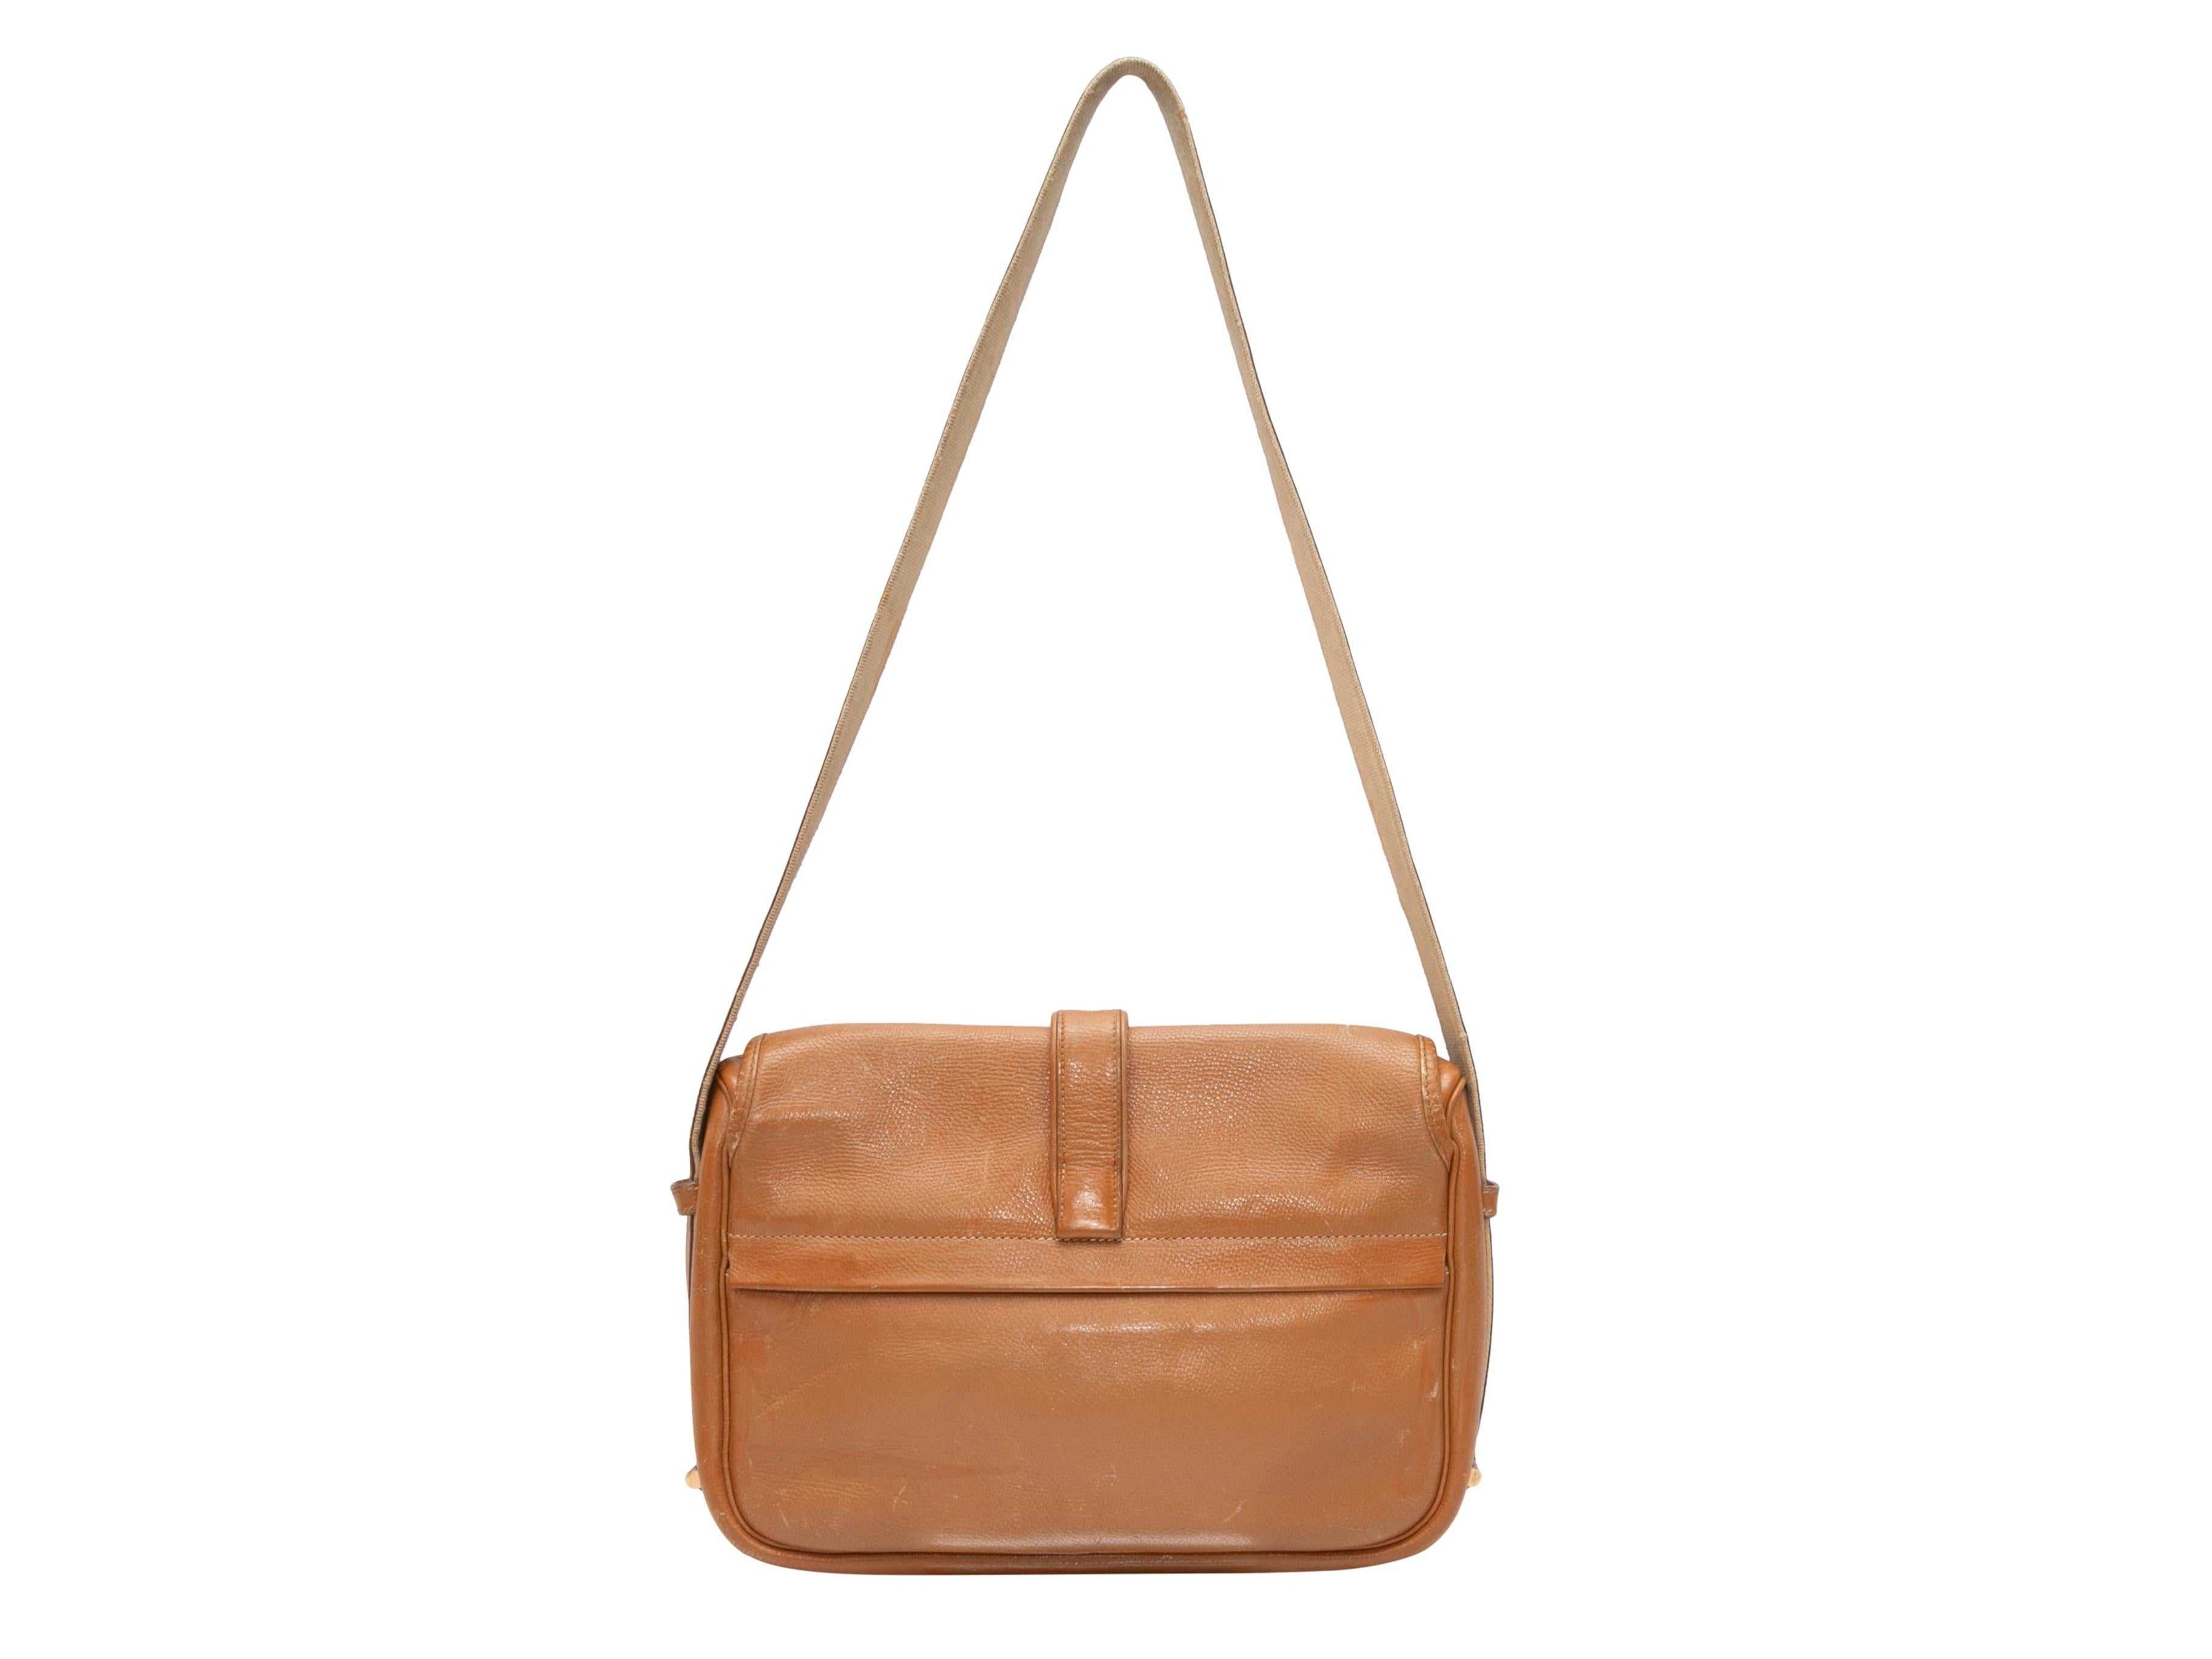  Vintage Tan Hermes 1980s Nouema Bag. The Nouema Bag features a natural buffalo leather body, gold-tone hardware, a single flat shoulder strap, and a front flap closure. 12